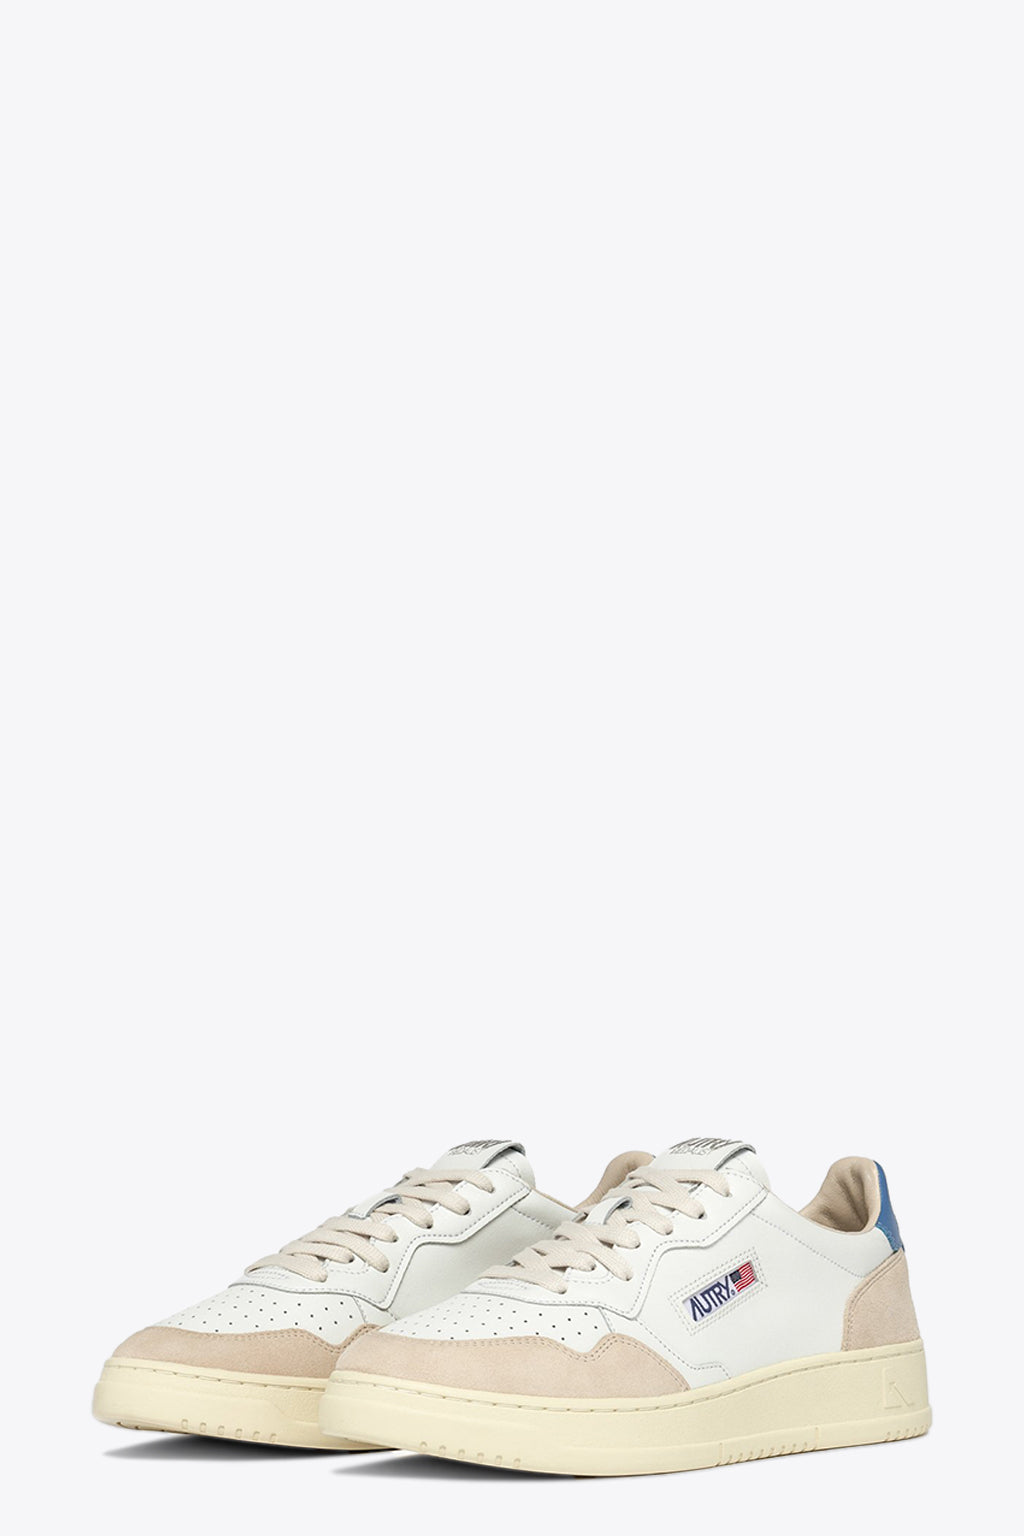 alt-image__White-leather-low-sneaker-with-blue-tab---Medalist